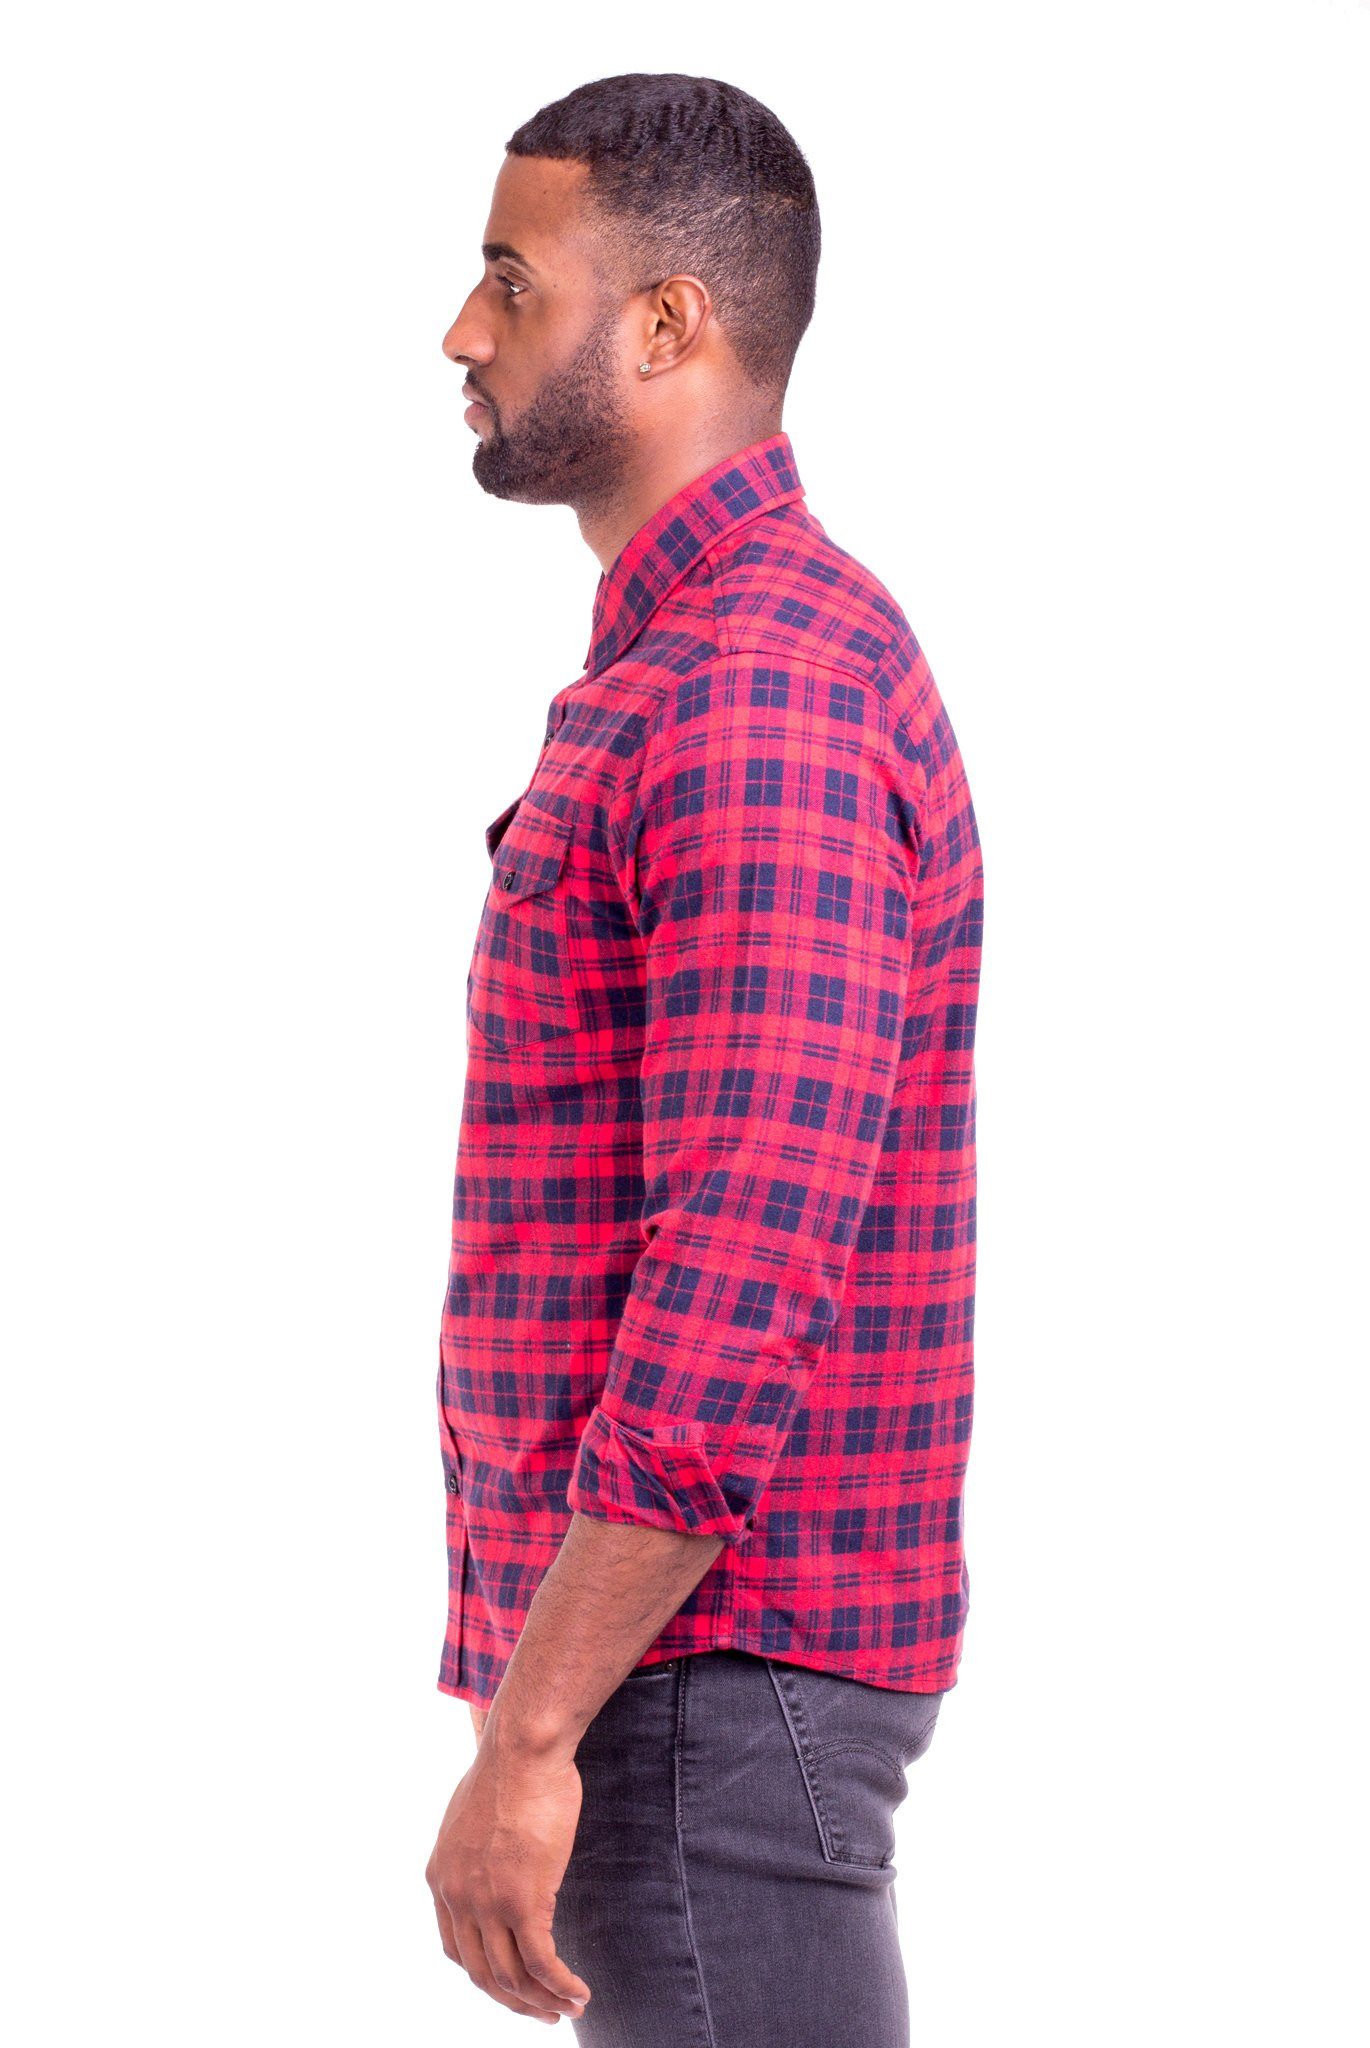 JOHNNY RED/BLUE PLAID FLANNEL SHIRT | Poor Little Rich Boy Clothing